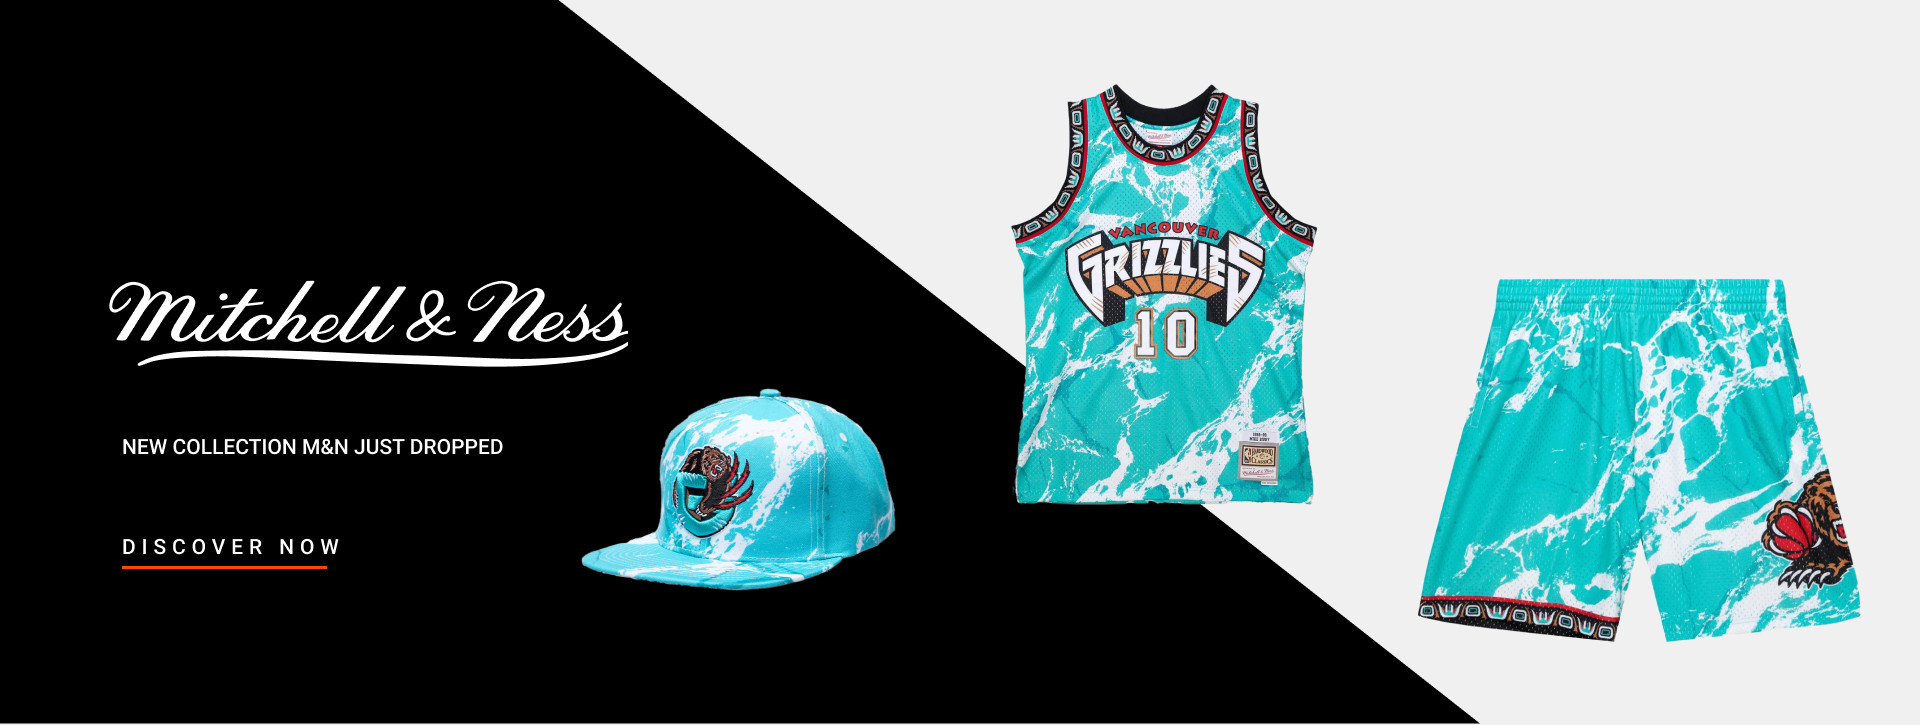 mitchell and ness